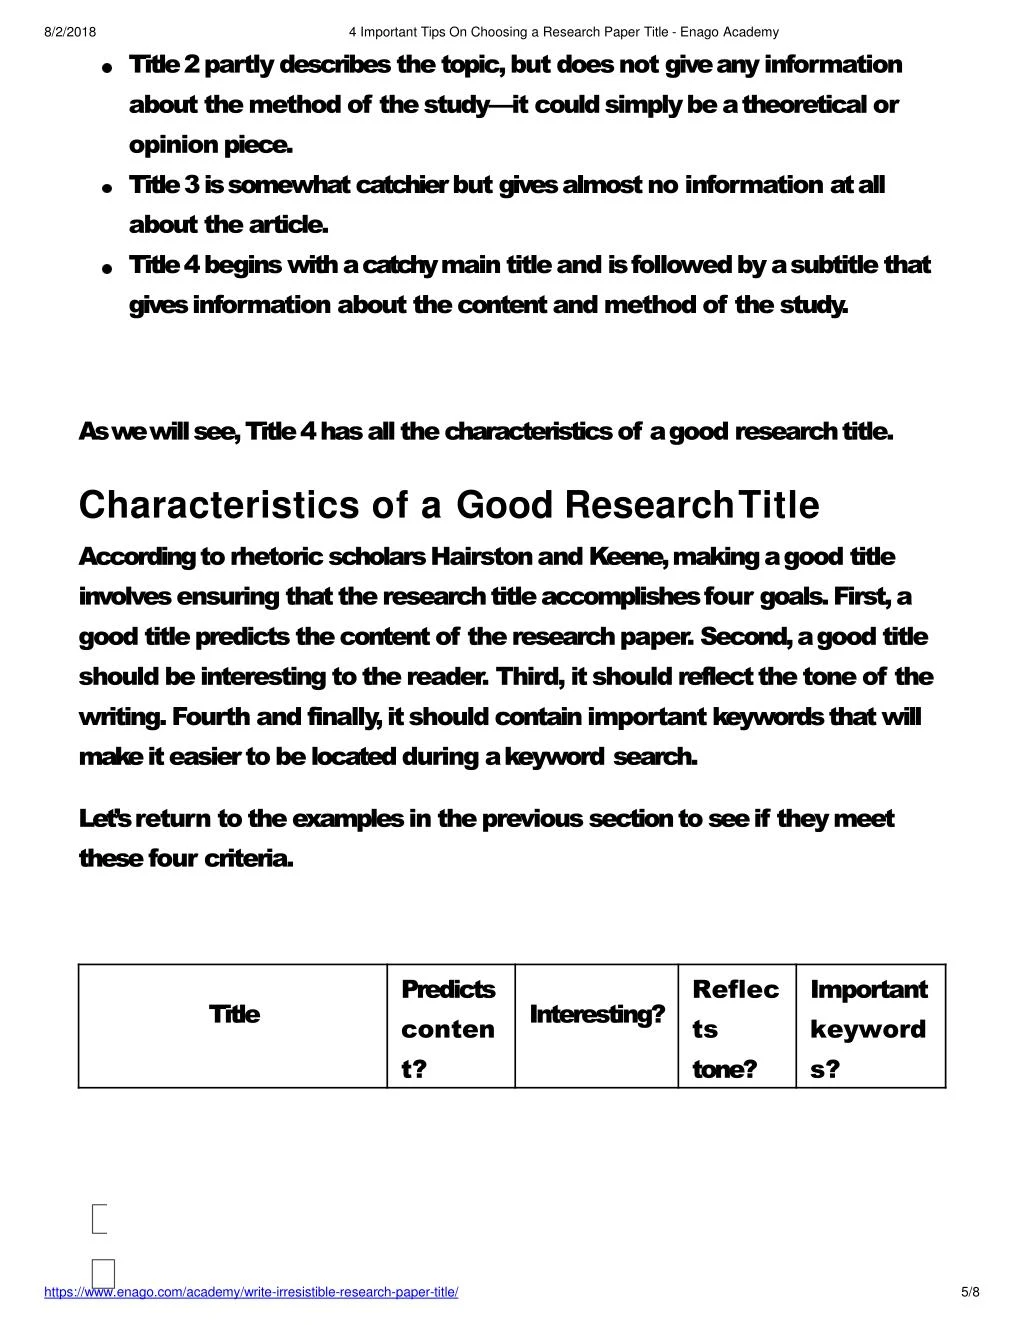 characteristics of a good research title